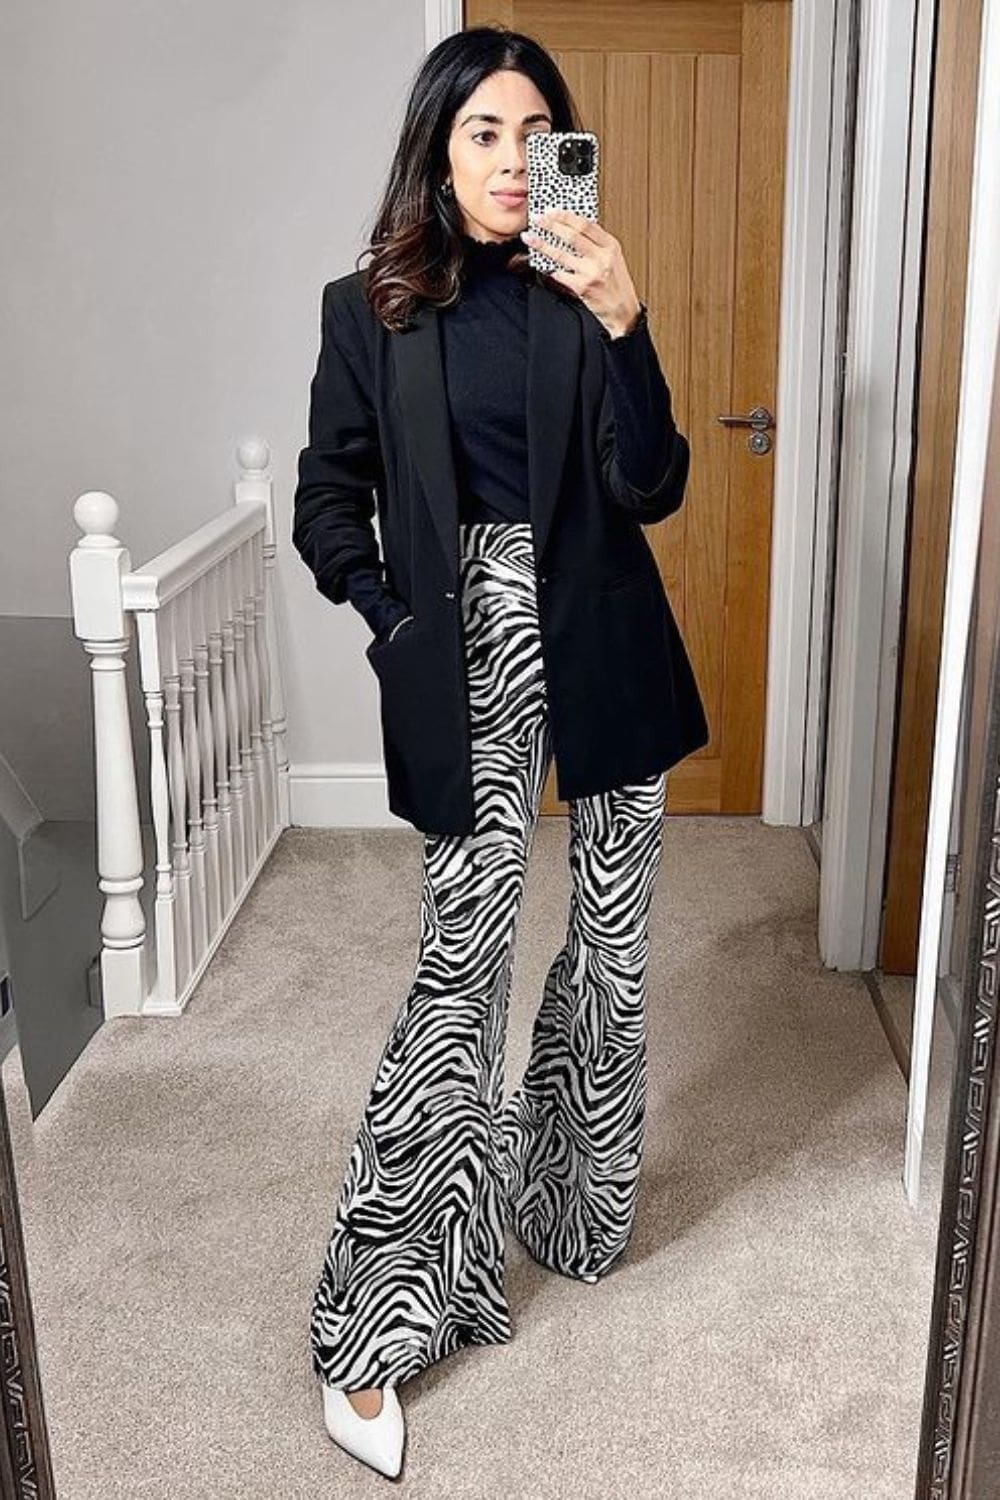 How to style animal prints with blazer, turtleneck and animal print parts